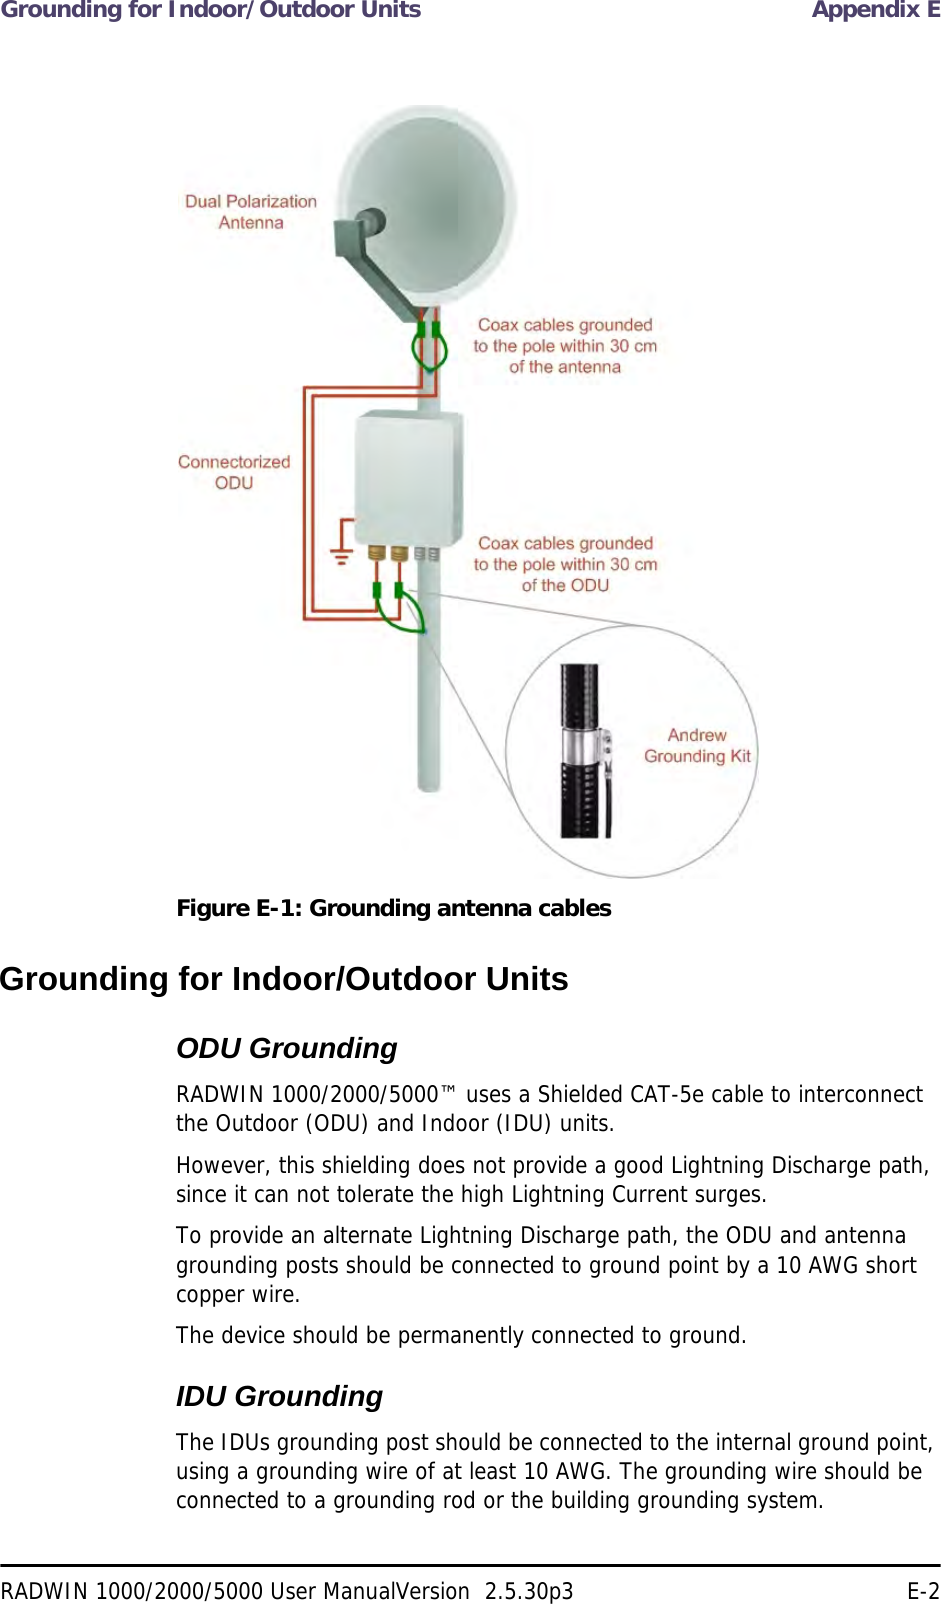 Grounding for Indoor/Outdoor Units Appendix ERADWIN 1000/2000/5000 User ManualVersion  2.5.30p3 E-2Figure E-1: Grounding antenna cablesGrounding for Indoor/Outdoor UnitsODU GroundingRADWIN 1000/2000/5000™ uses a Shielded CAT-5e cable to interconnect the Outdoor (ODU) and Indoor (IDU) units. However, this shielding does not provide a good Lightning Discharge path, since it can not tolerate the high Lightning Current surges.To provide an alternate Lightning Discharge path, the ODU and antenna grounding posts should be connected to ground point by a 10 AWG short copper wire.The device should be permanently connected to ground.IDU GroundingThe IDUs grounding post should be connected to the internal ground point, using a grounding wire of at least 10 AWG. The grounding wire should be connected to a grounding rod or the building grounding system.